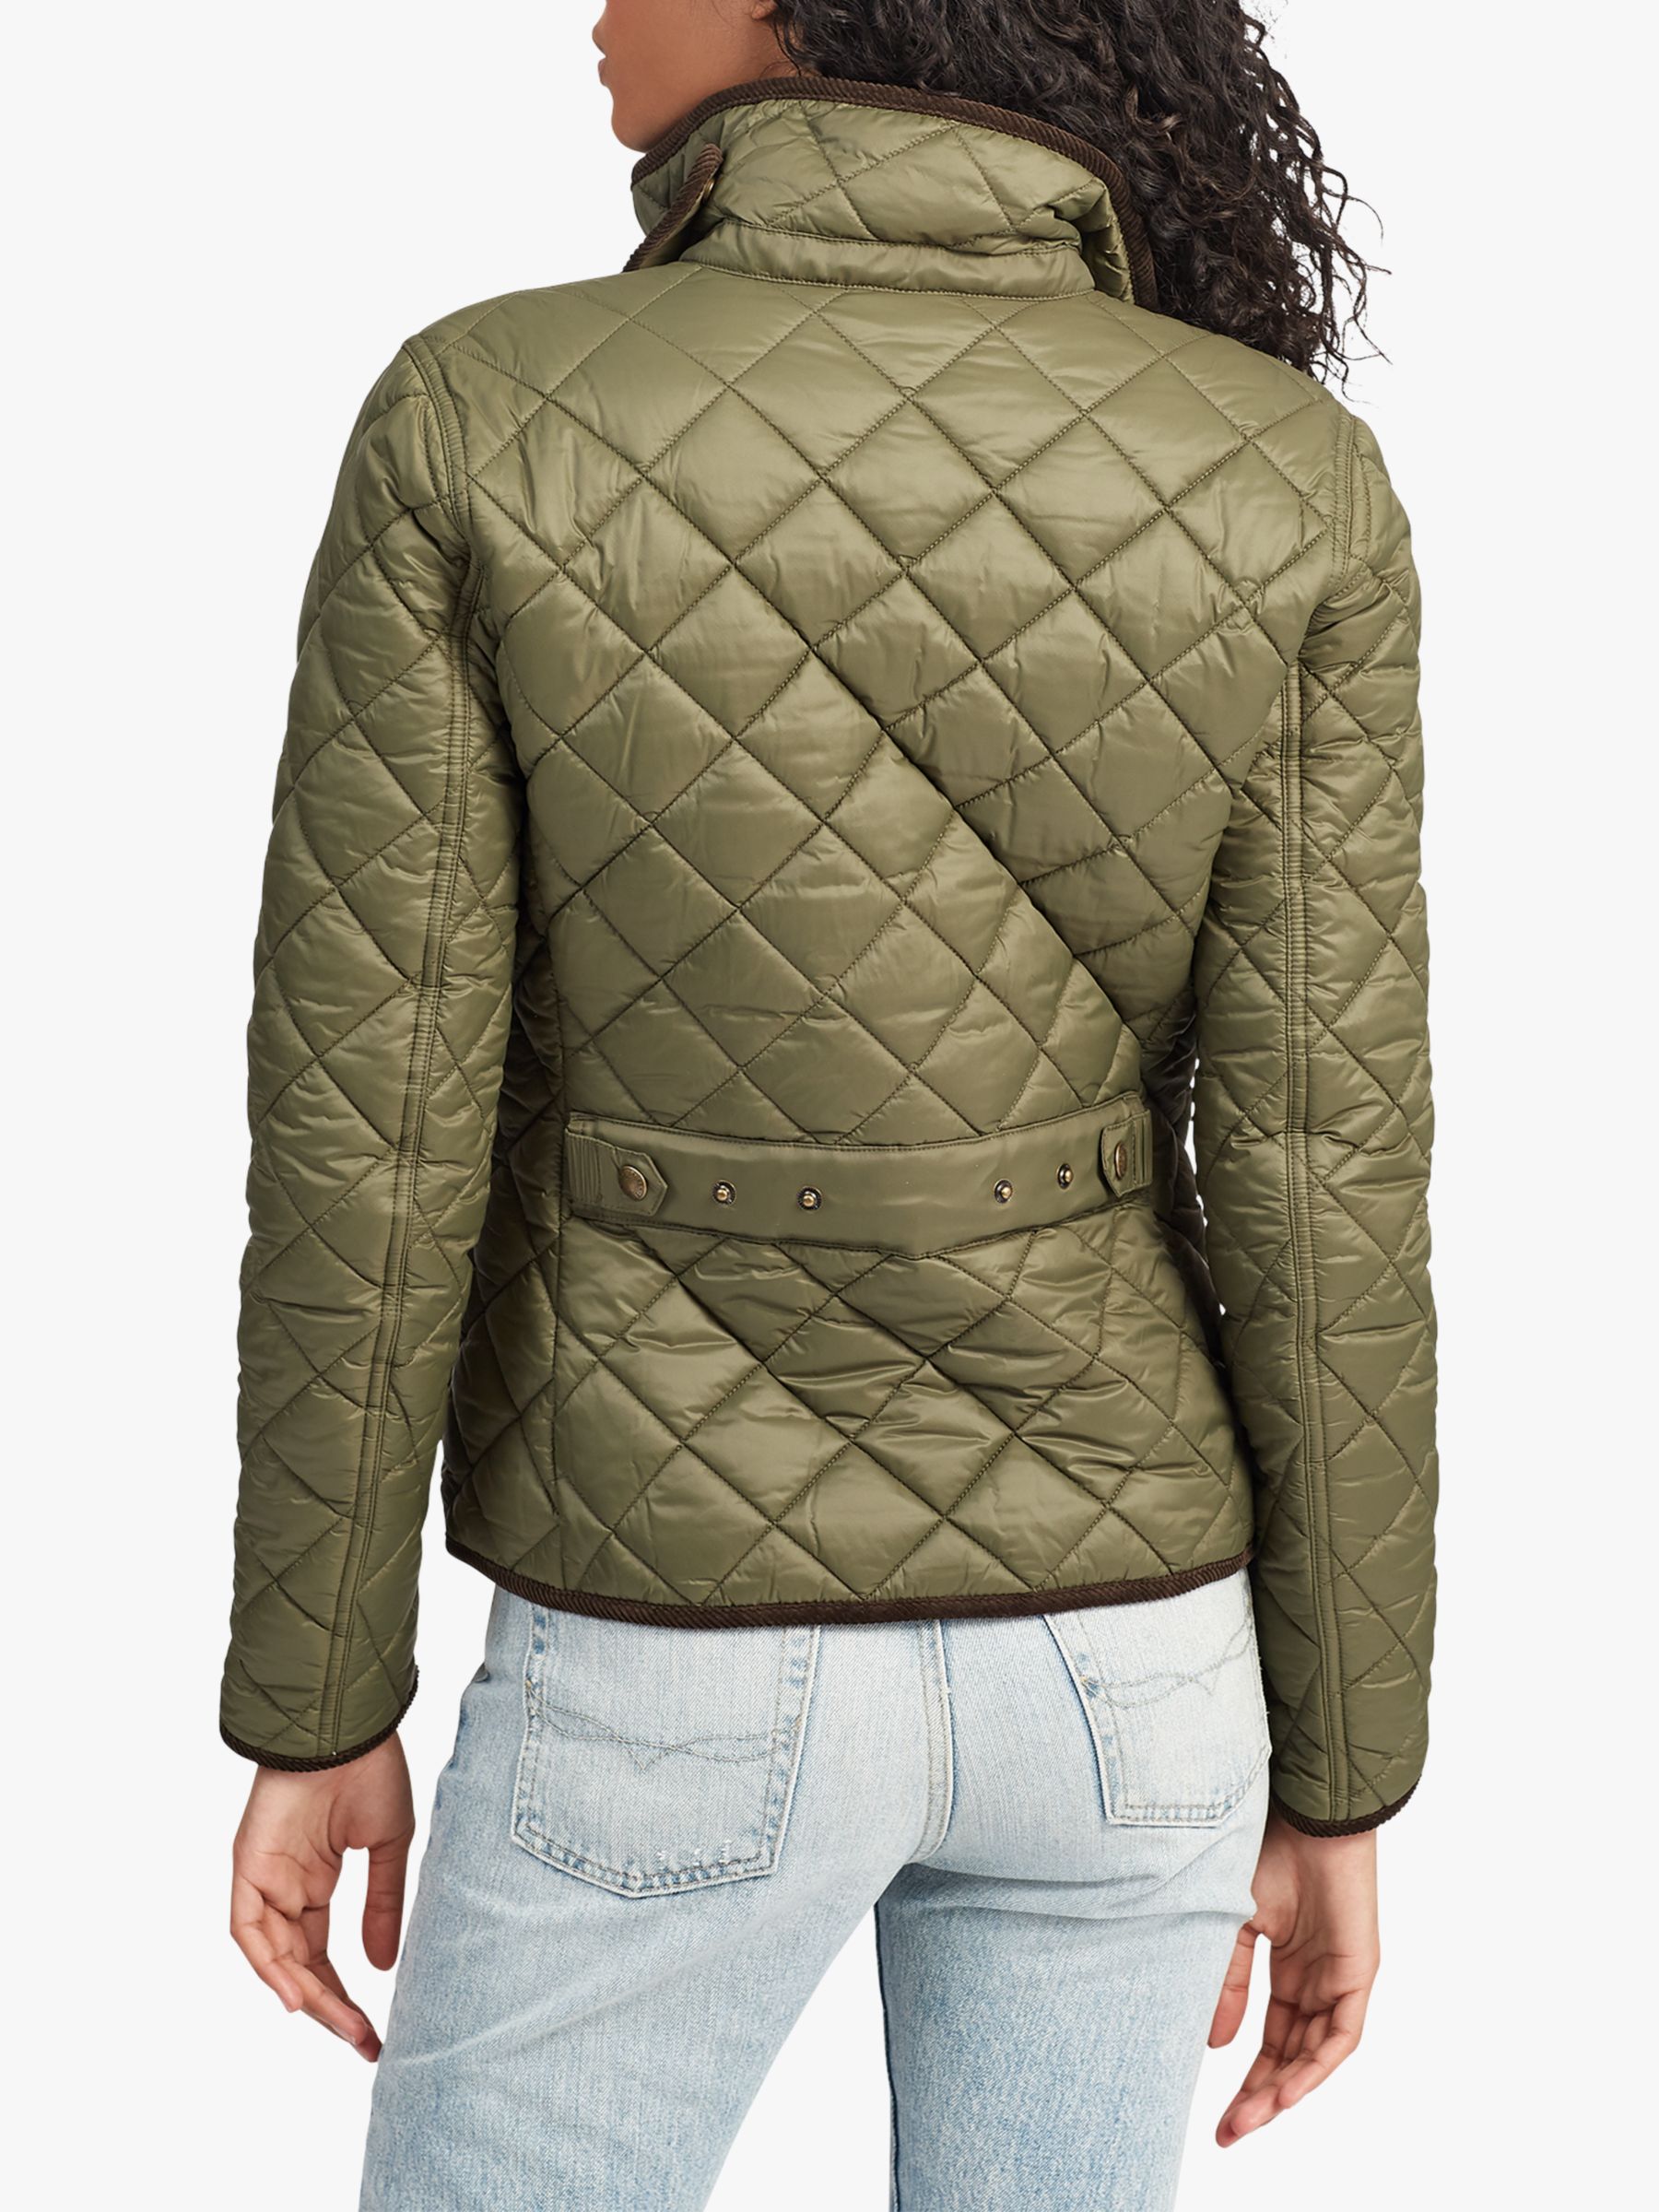 Polo Ralph Lauren Women's Quilted Jacket In Olive Green NWT